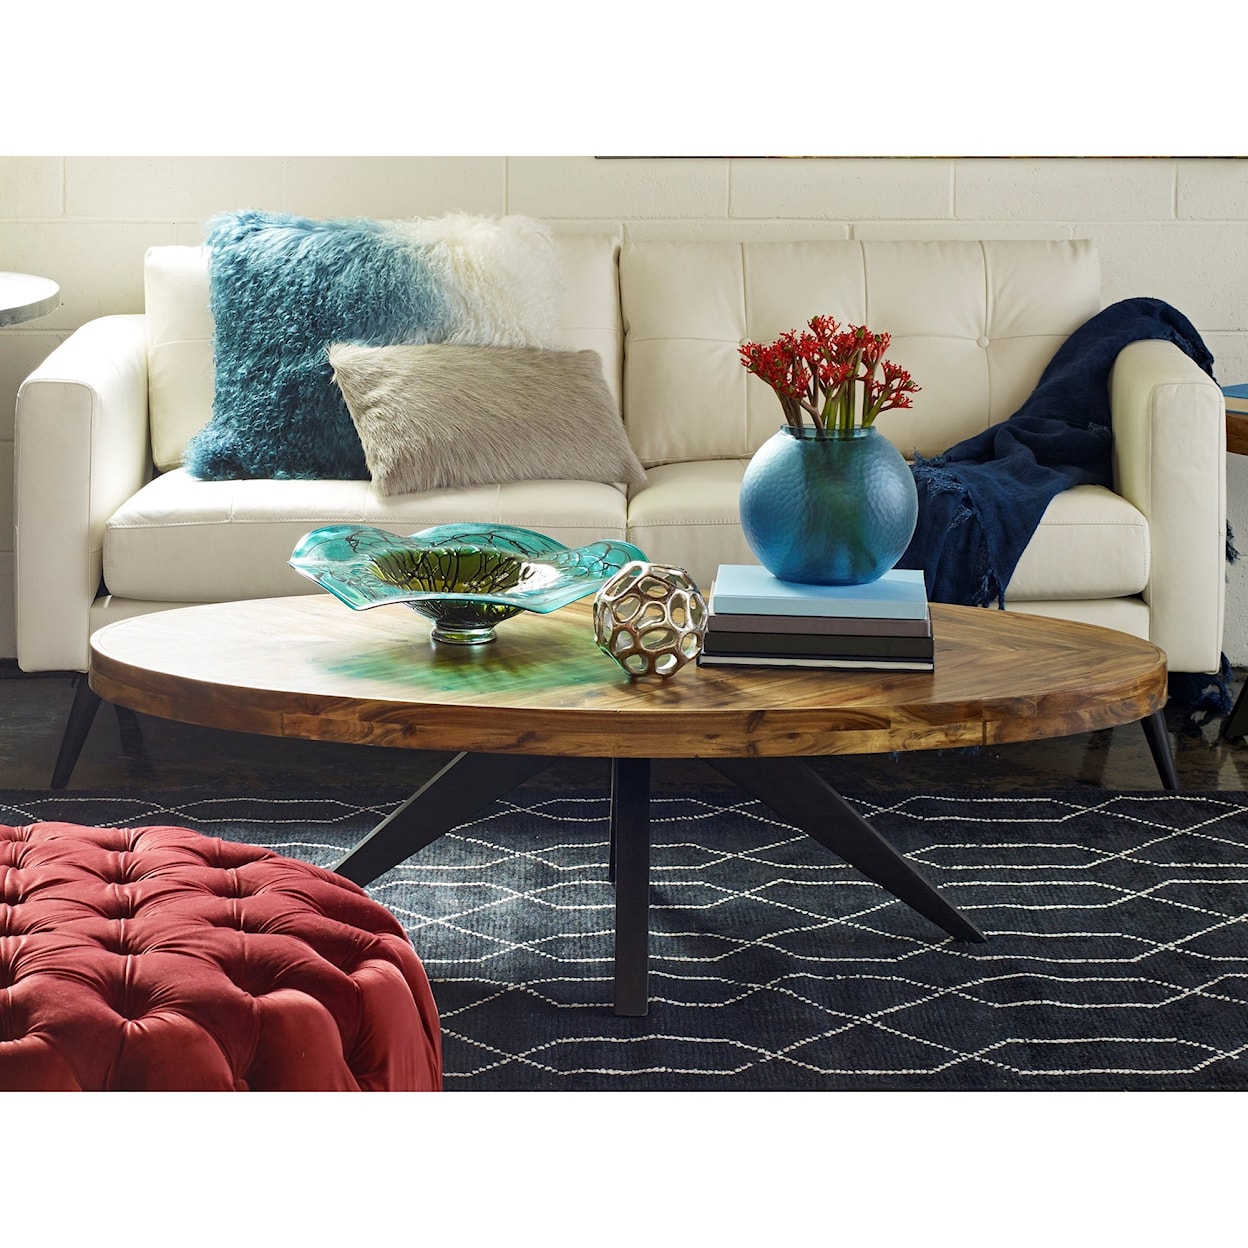 Moe's Home Collection Parq Oval Coffee Table